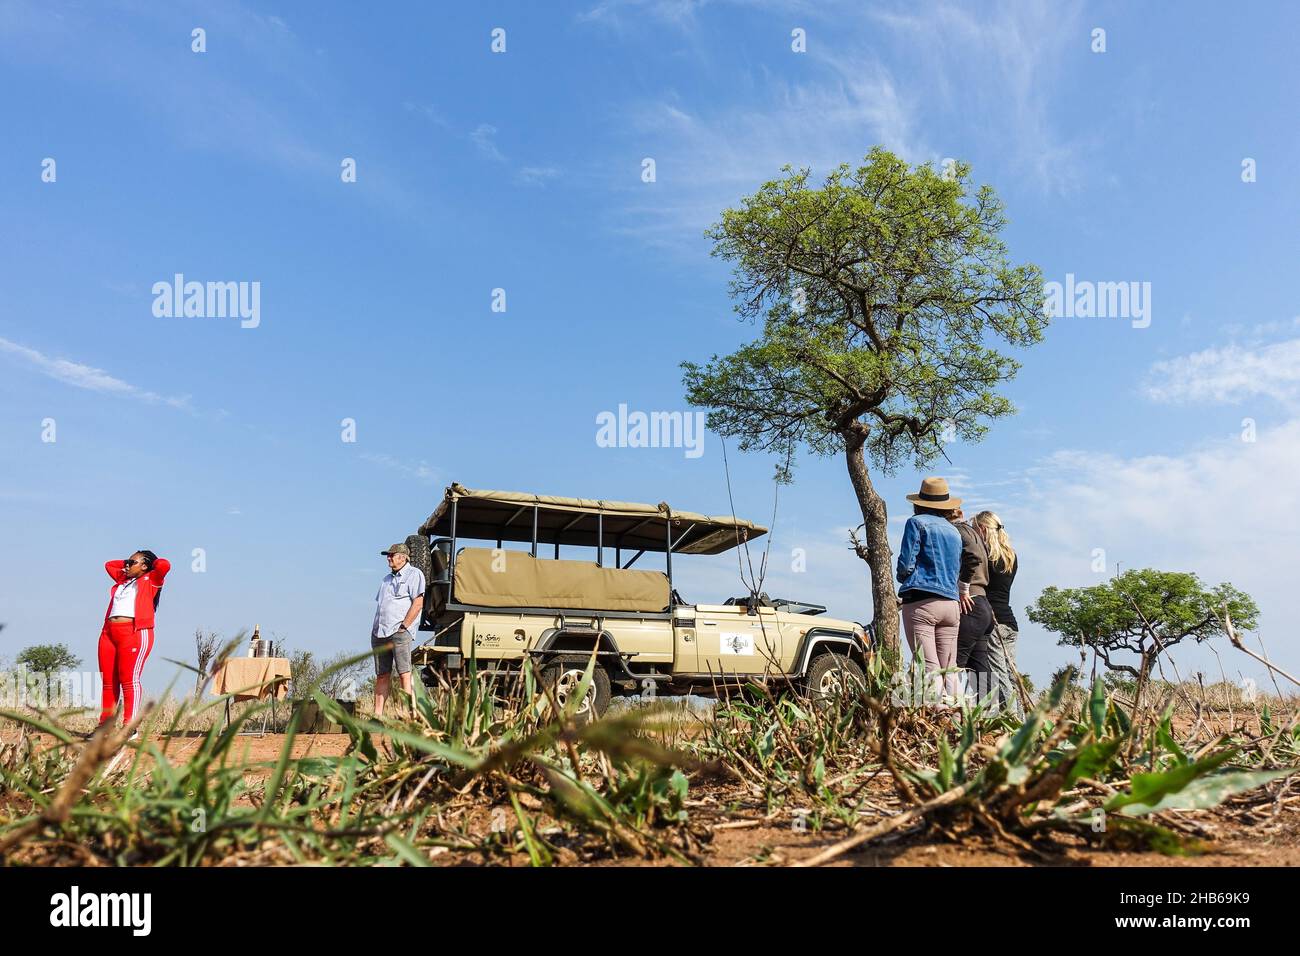 Tourists on a game drive, safari trip, among the wildlife of Kruger National Park, South Africa Stock Photo